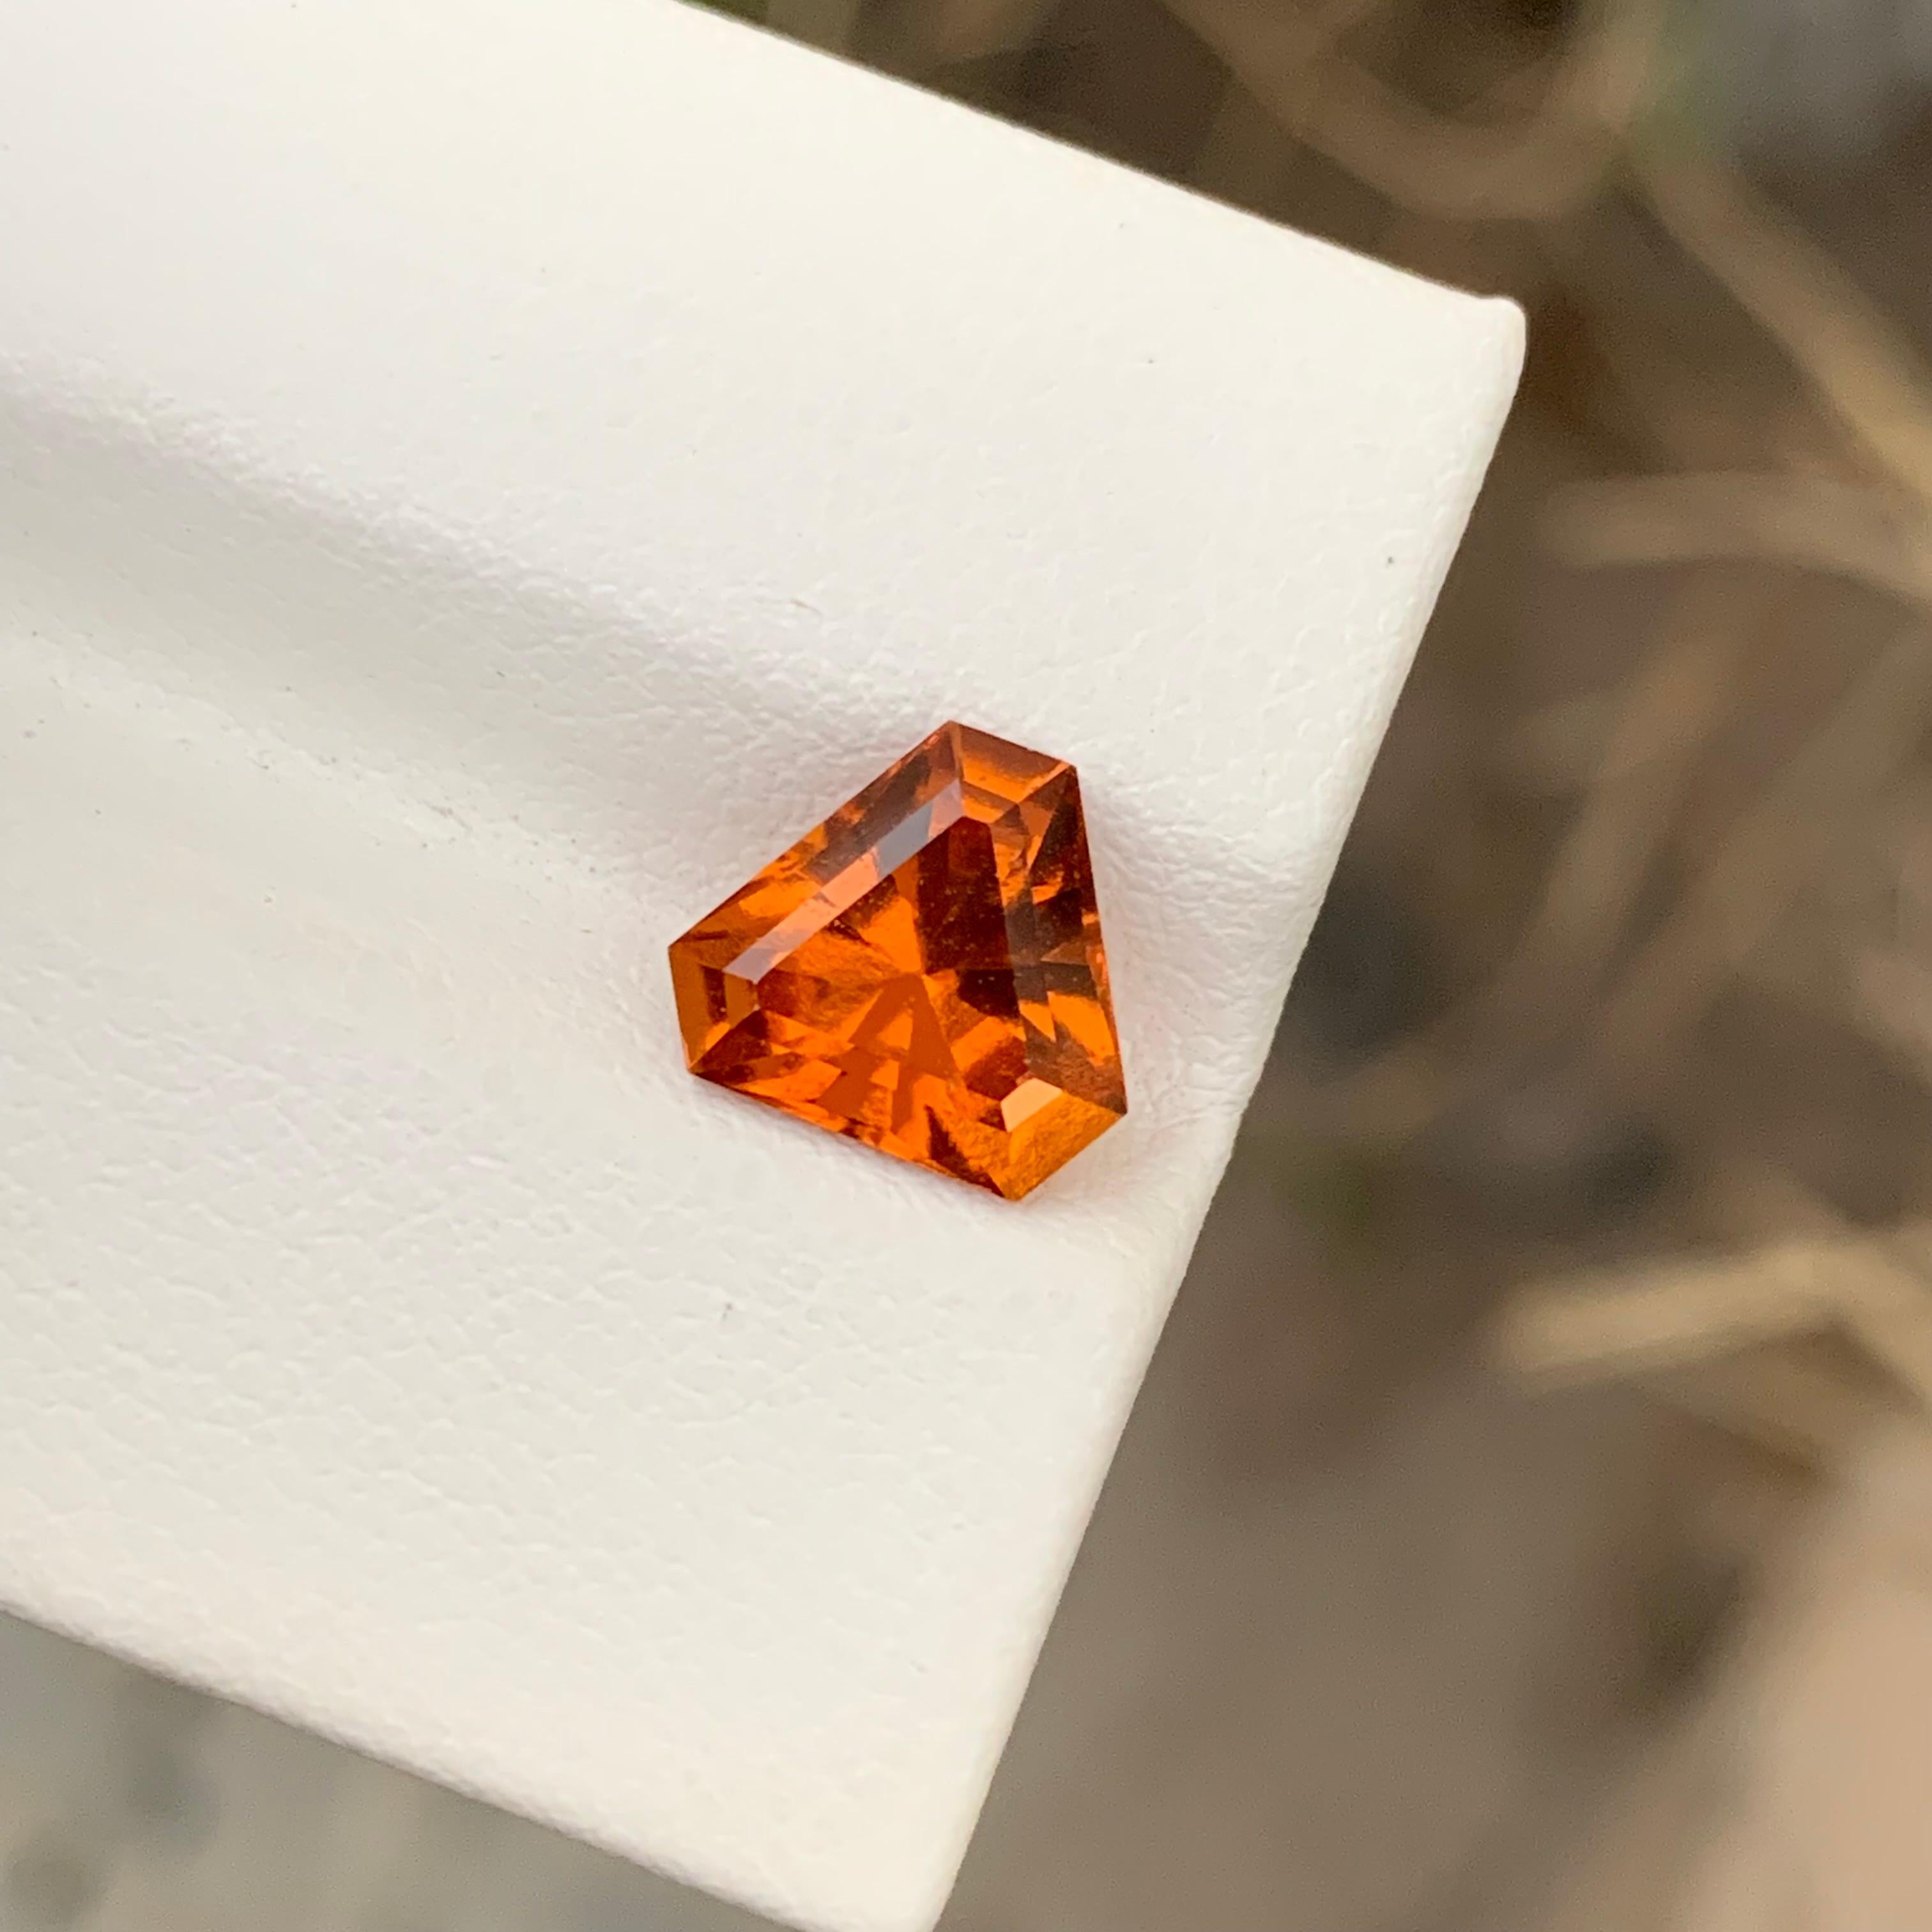 Arts and Crafts 2.40 Carat Pretty Loose Hessonite Garnet Trillion Cut Gem For Jewellery Making  For Sale